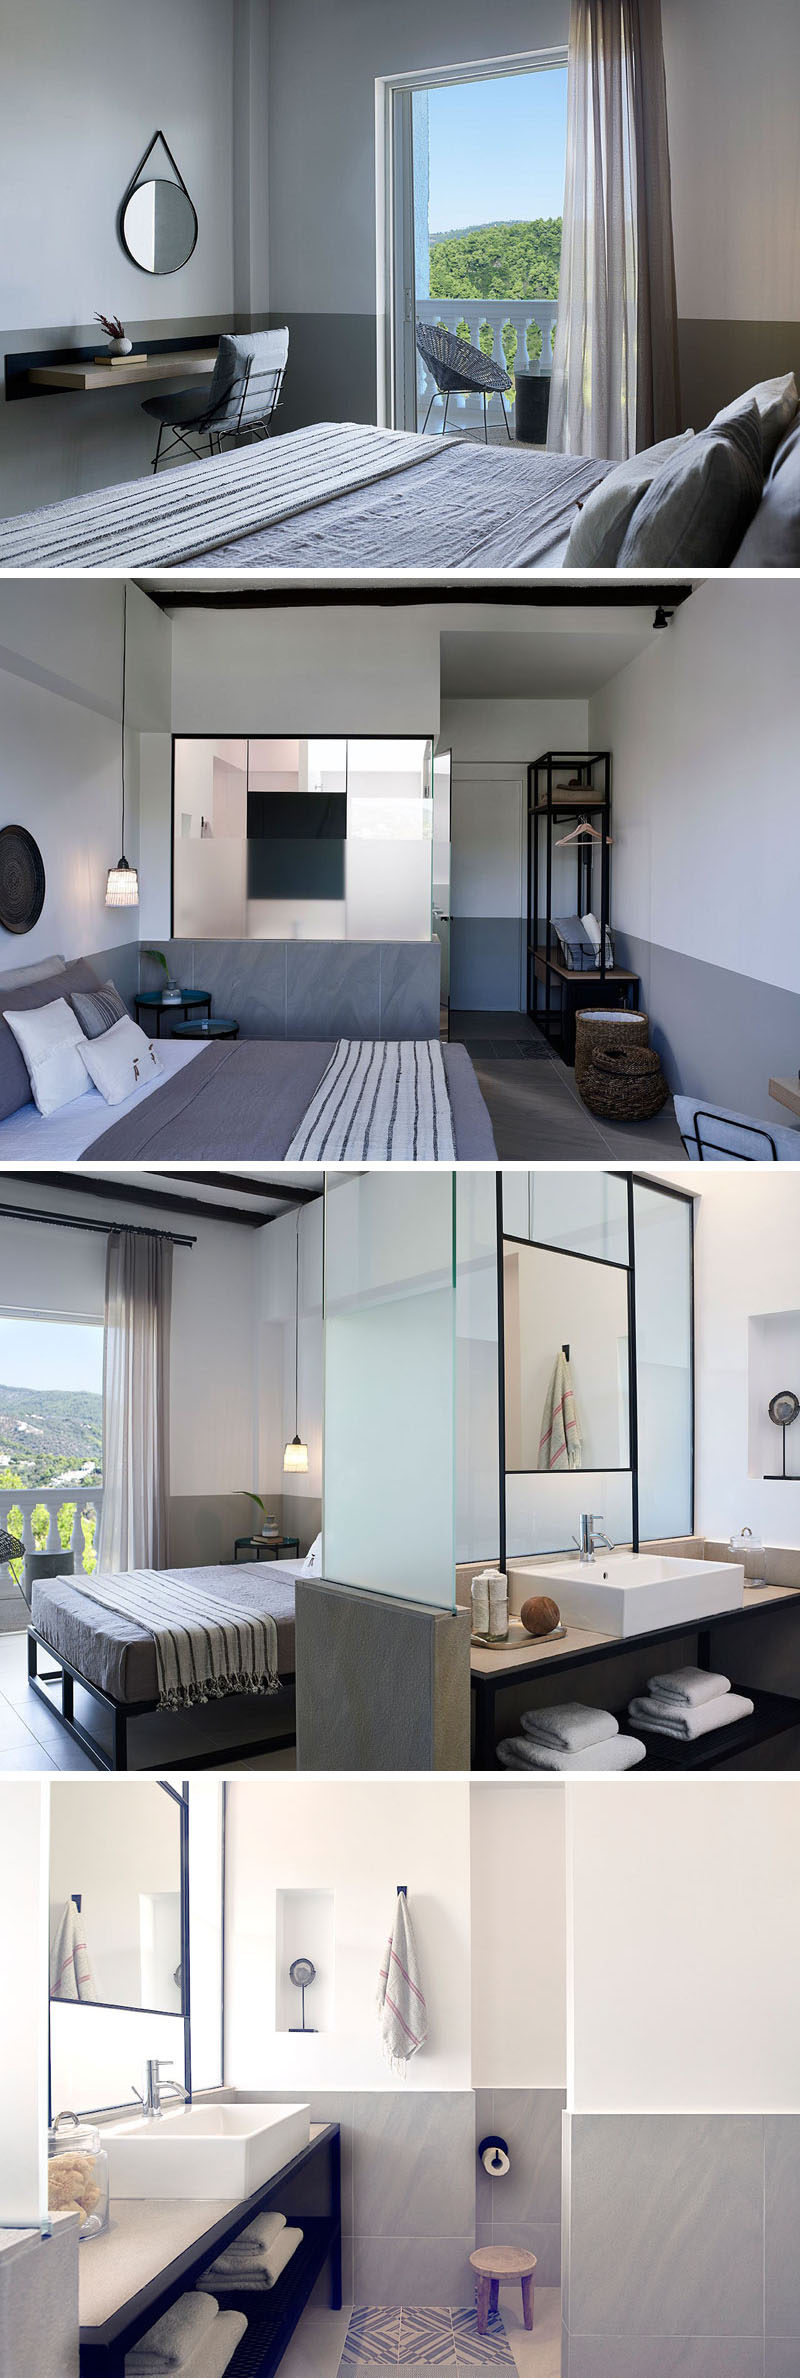 This modern hotel room has white walls with a lower grey stripe, decorative floor tiles, wall decor and glass room dividers separating the bathroom from the bedroom to create a Mediterranean style interior.